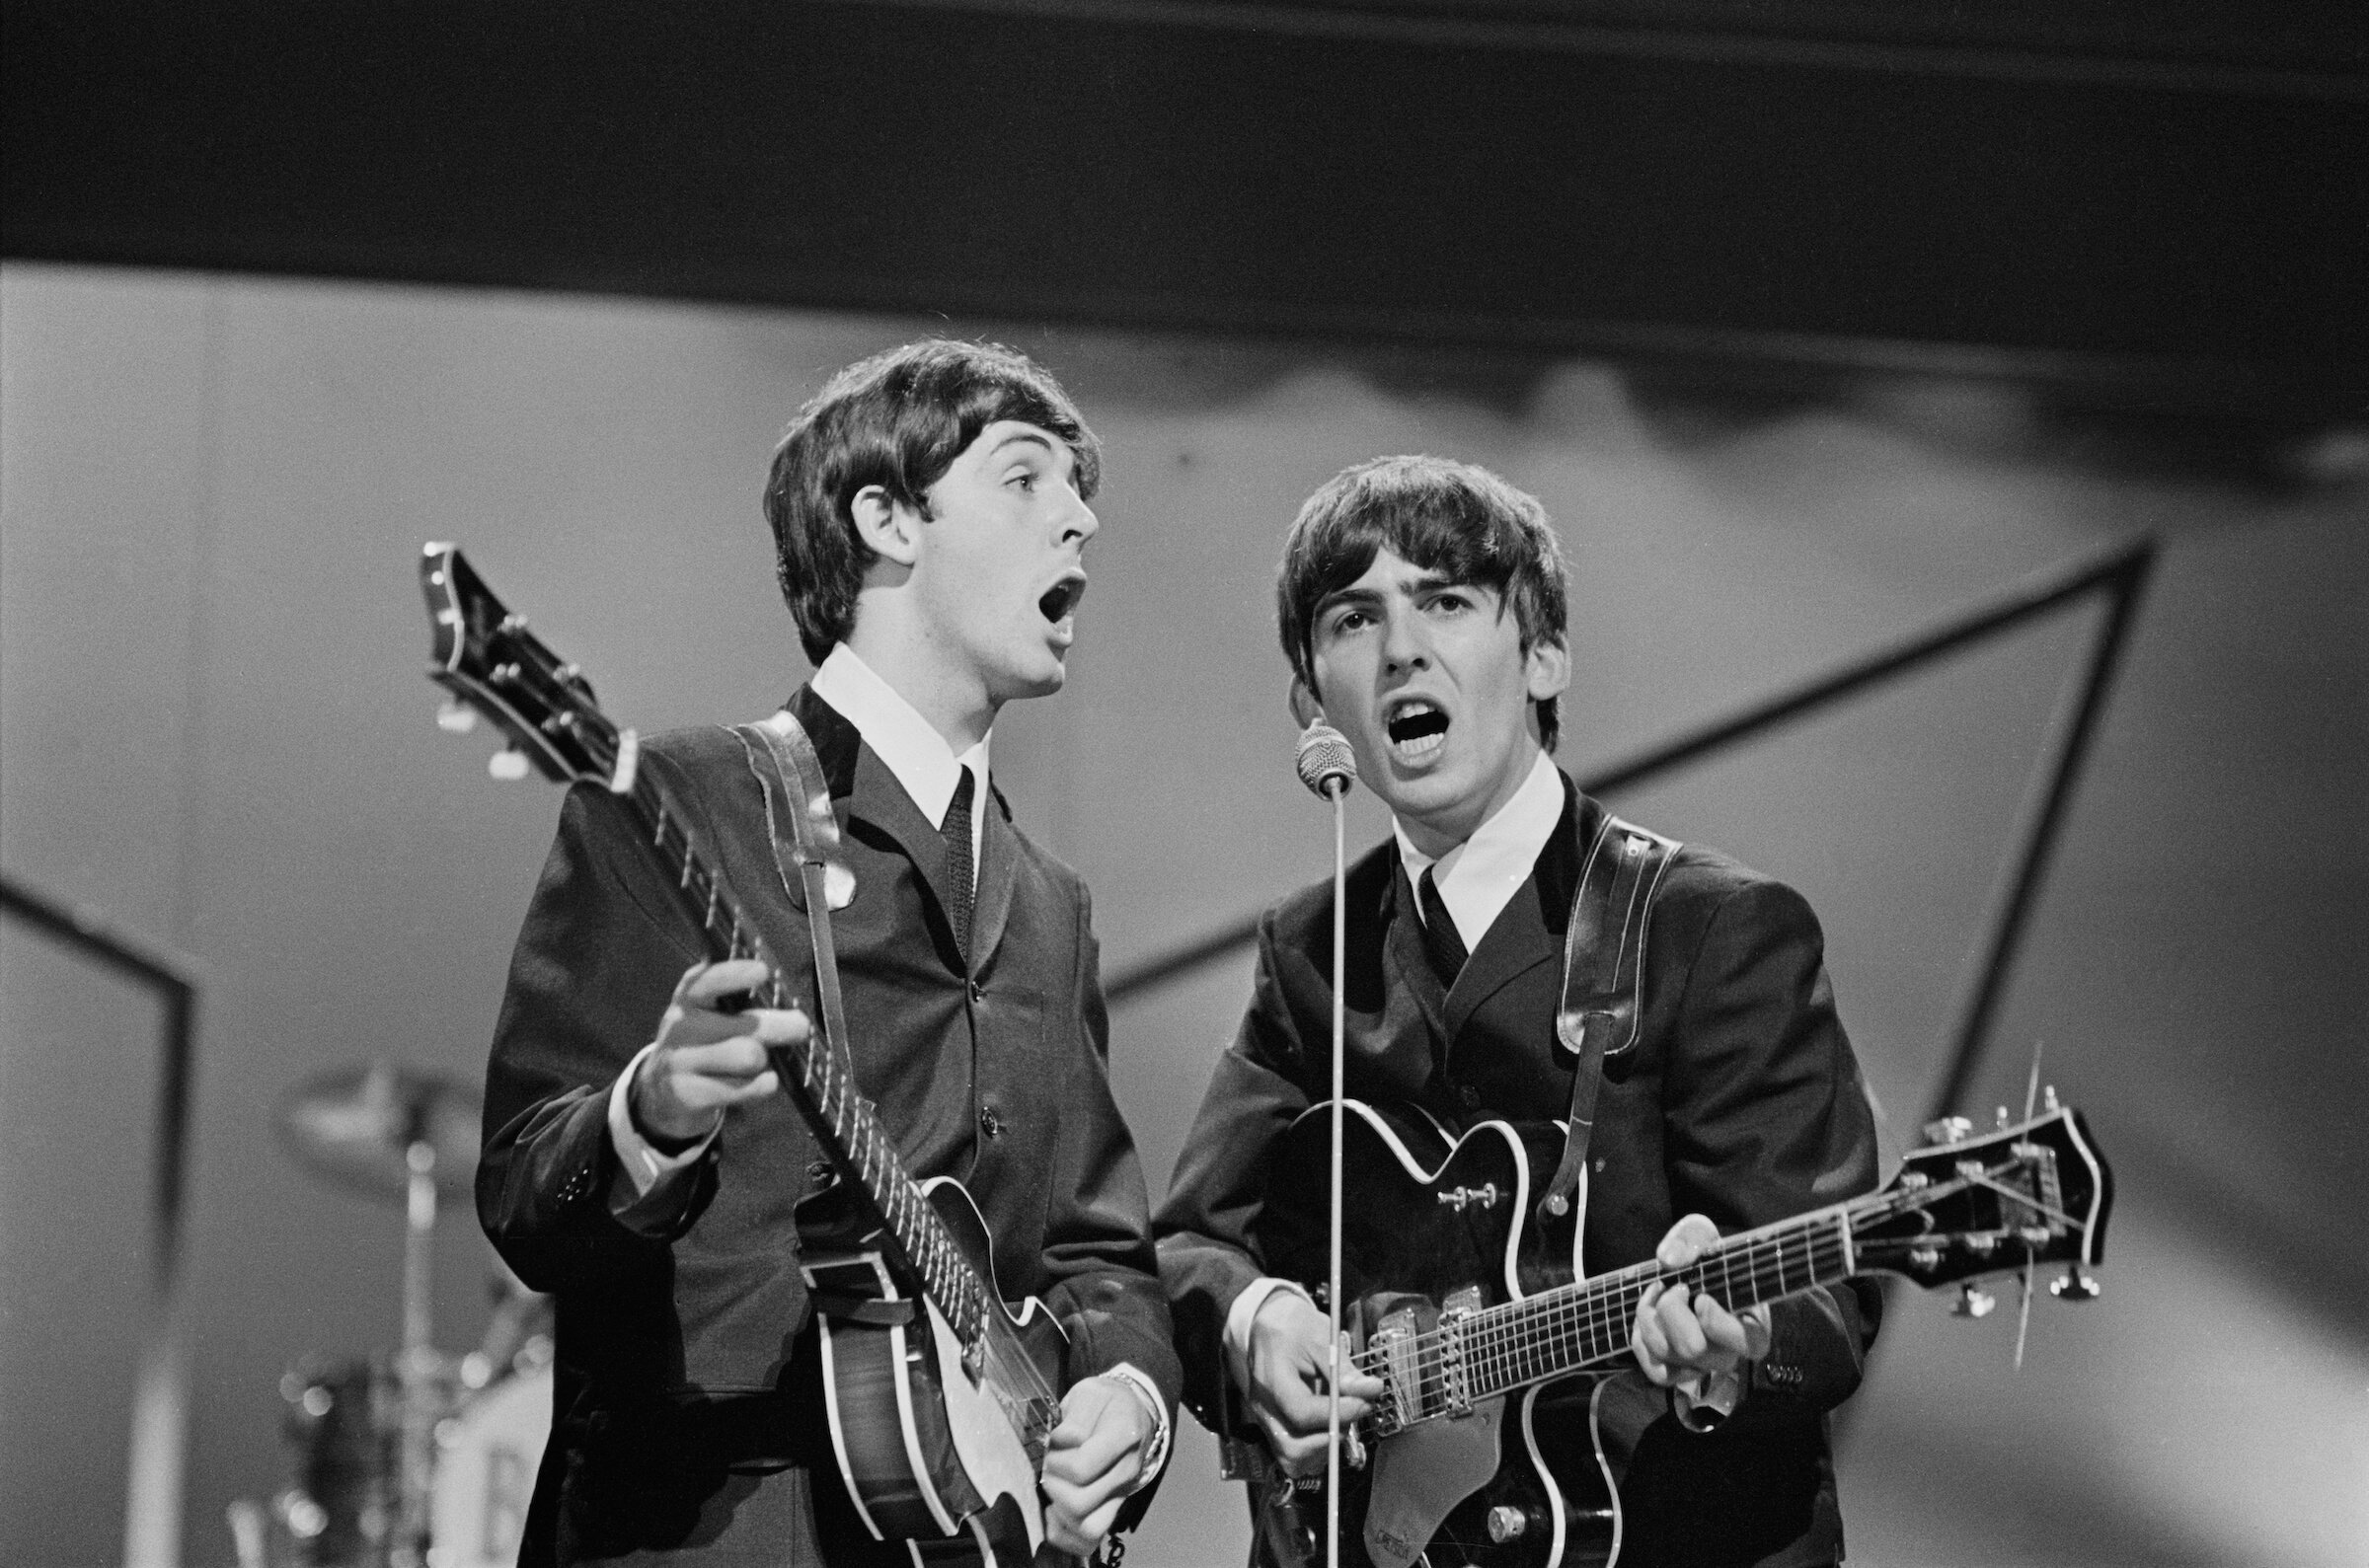 Paul McCartney and George Harrison (1943 - 2001) of the Beatles performing on stage at the London Palladium